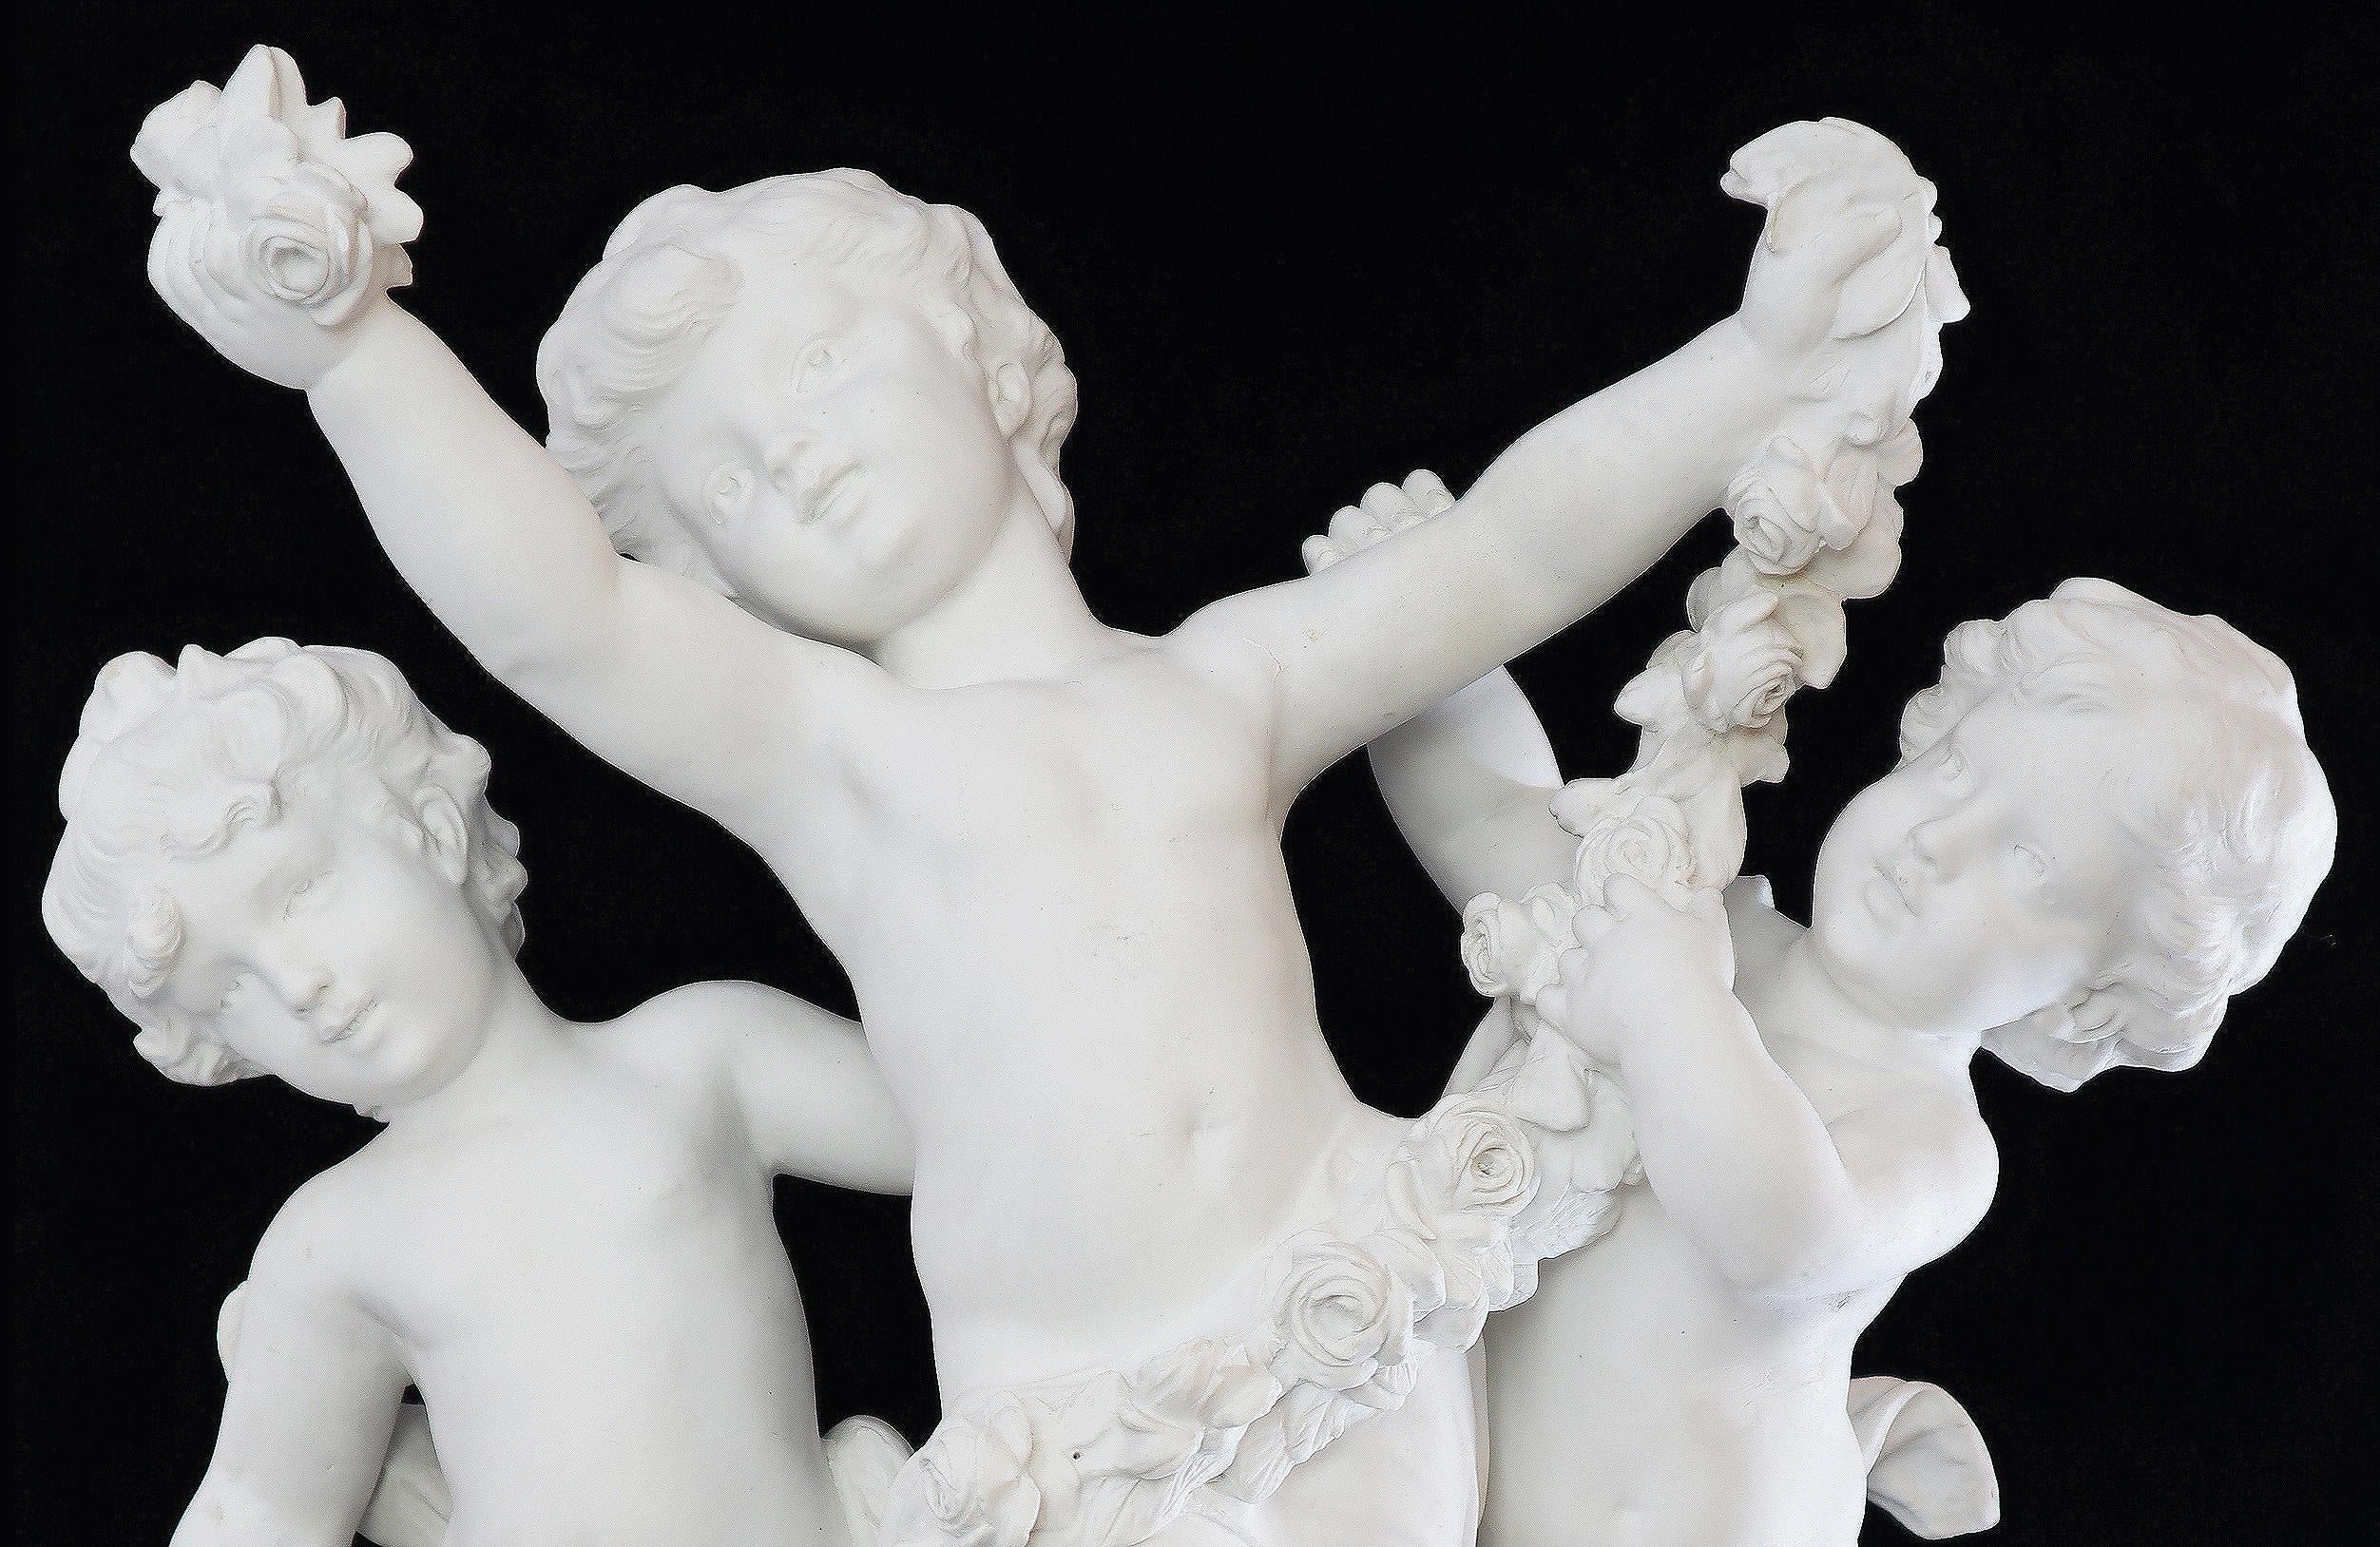 19th Century French Bisque Sculpture of 3 Cherubs, Signed Moreau 1